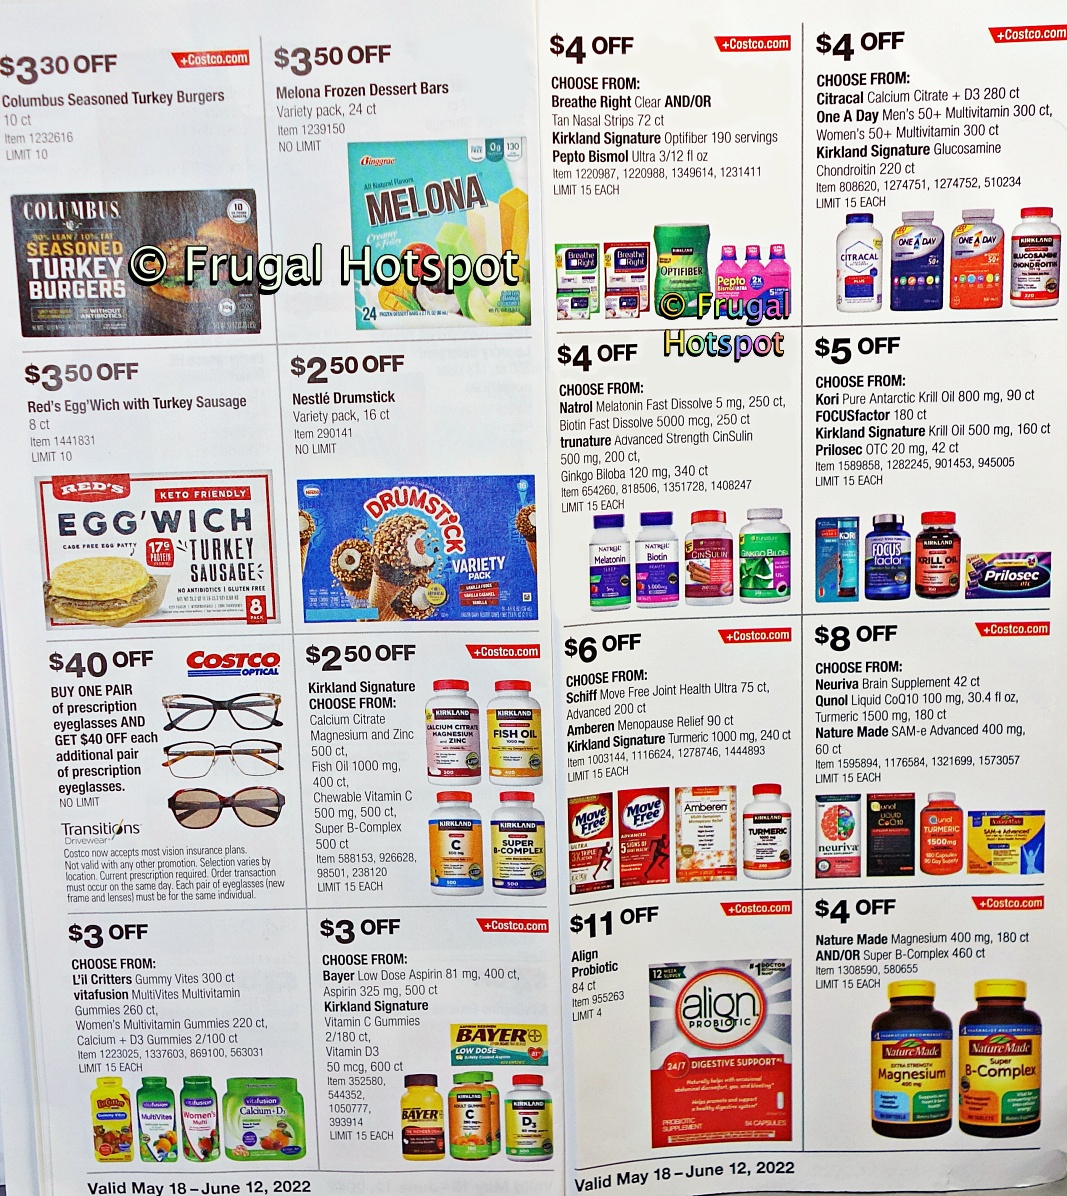 Costco MAY JUNE 2022 Coupon Book | P 22 and 23